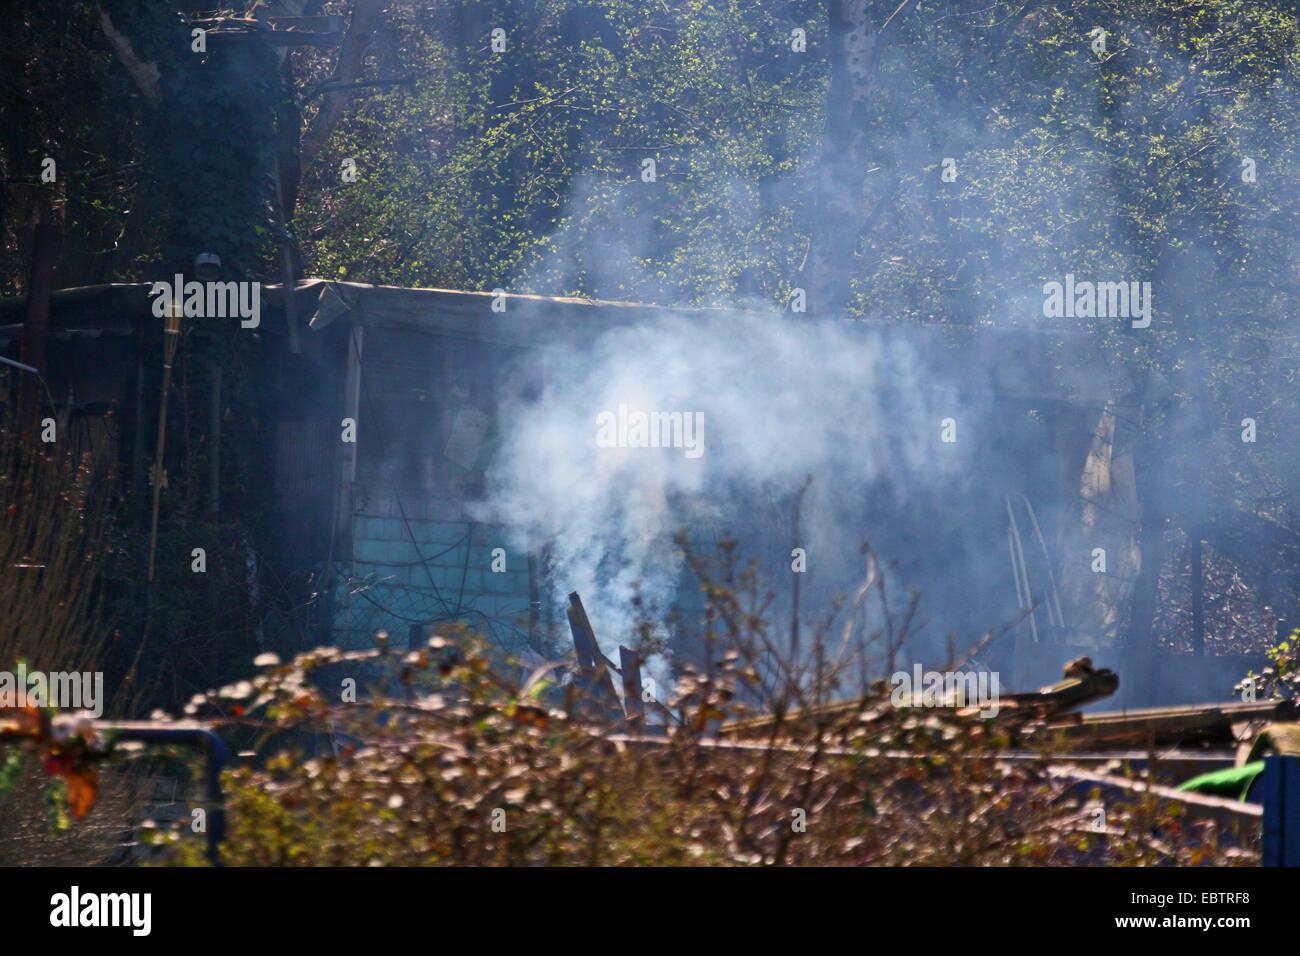 illegal burning of waste from an allotment holder, Germany, North Rhine-Westphalia Stock Photo